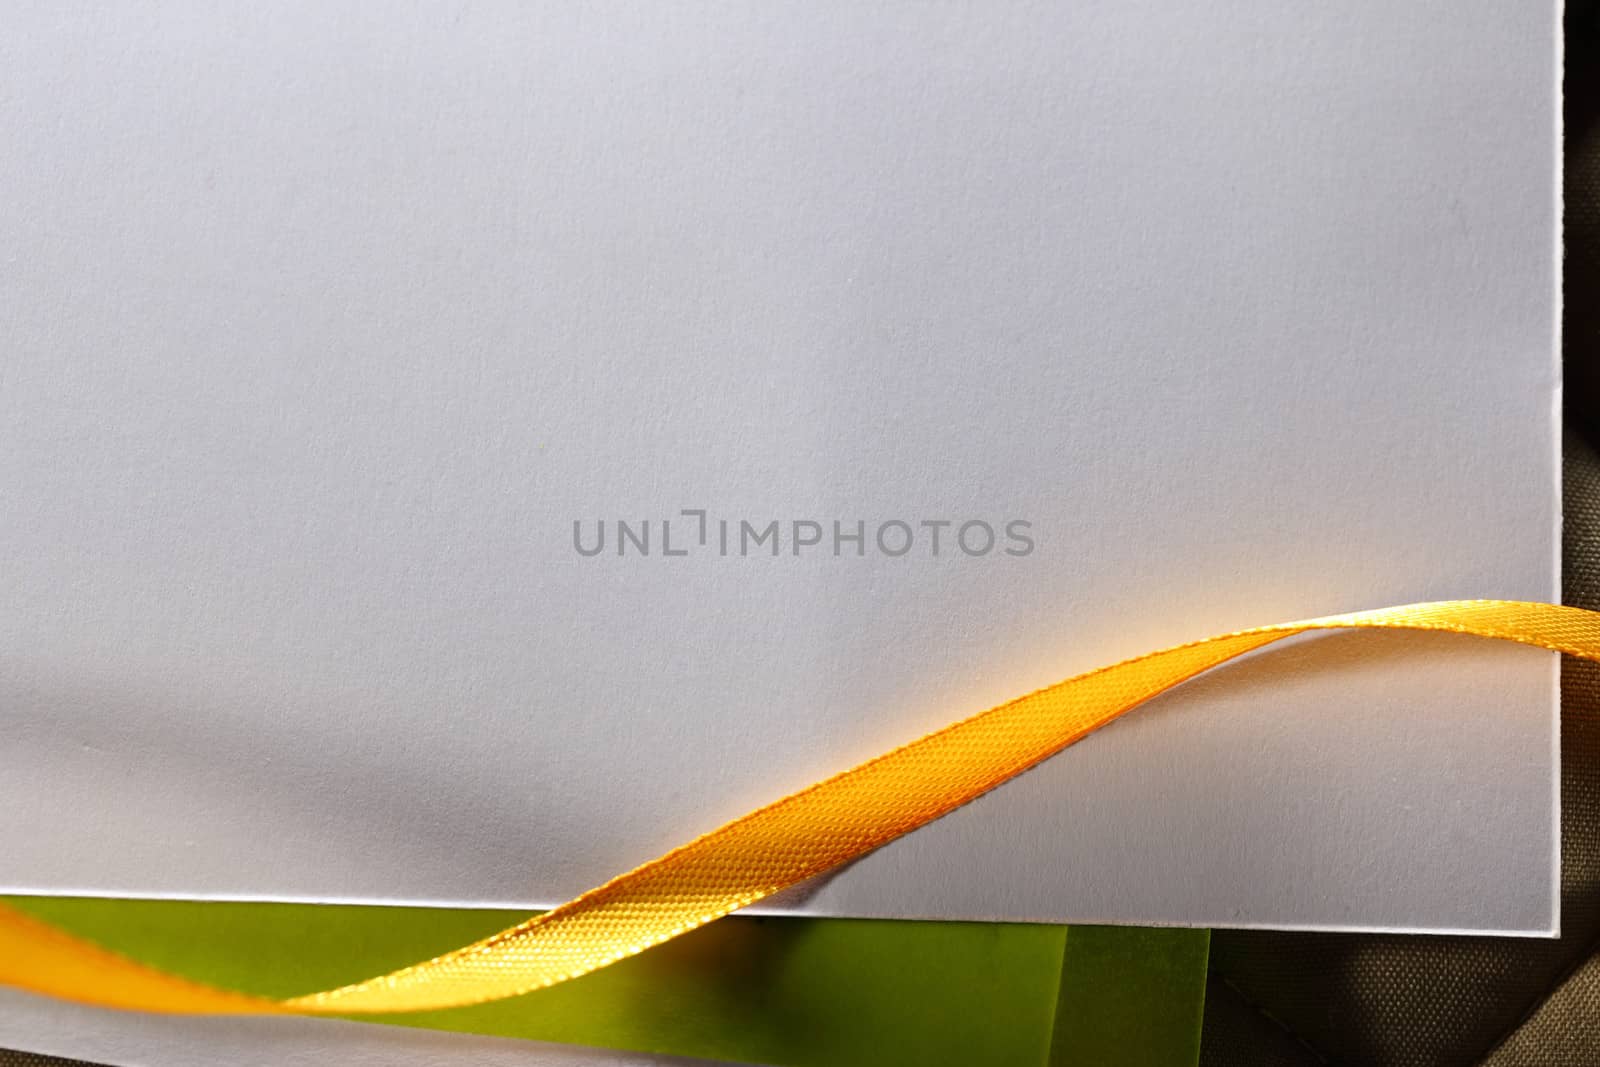 Blank greeting card with ribbons on checked background